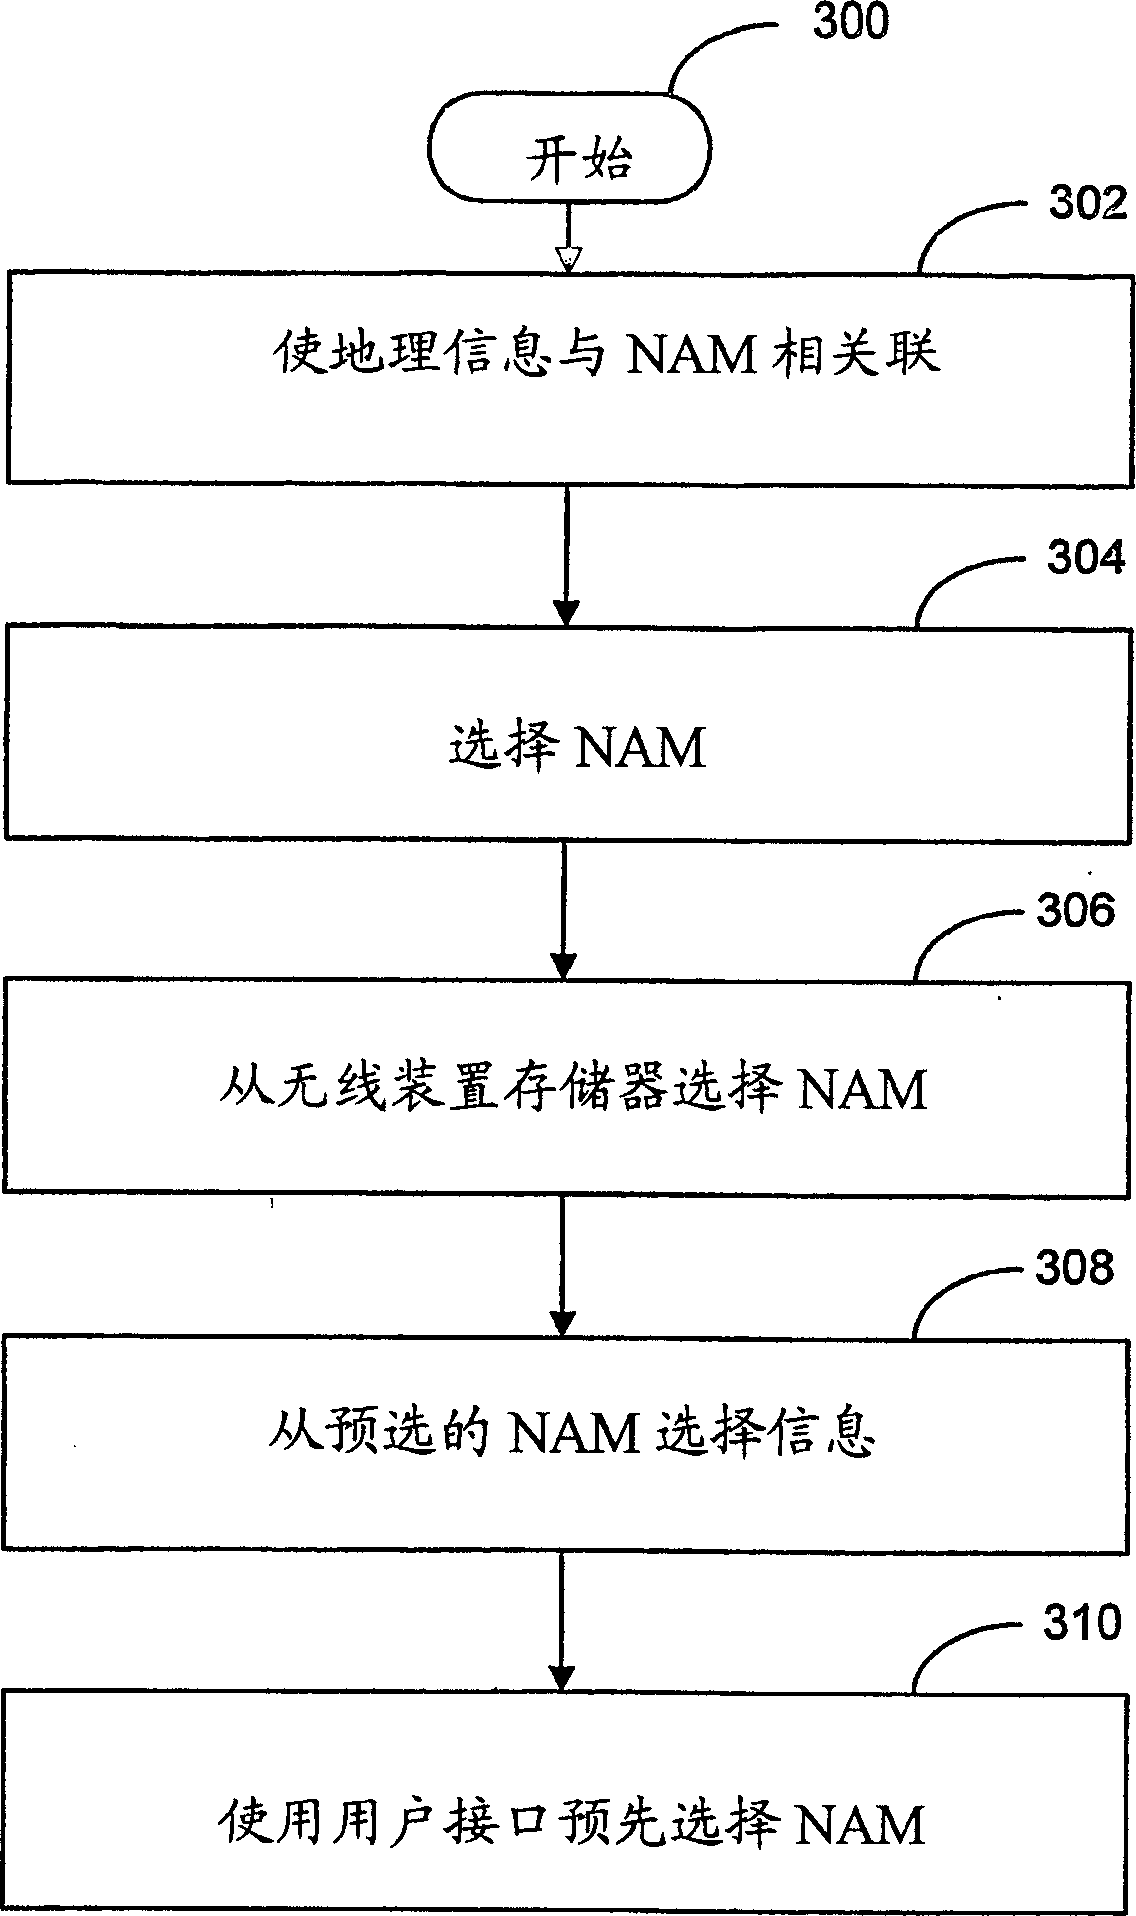 System and method for selecting communications coverage network information in a wireless communications device